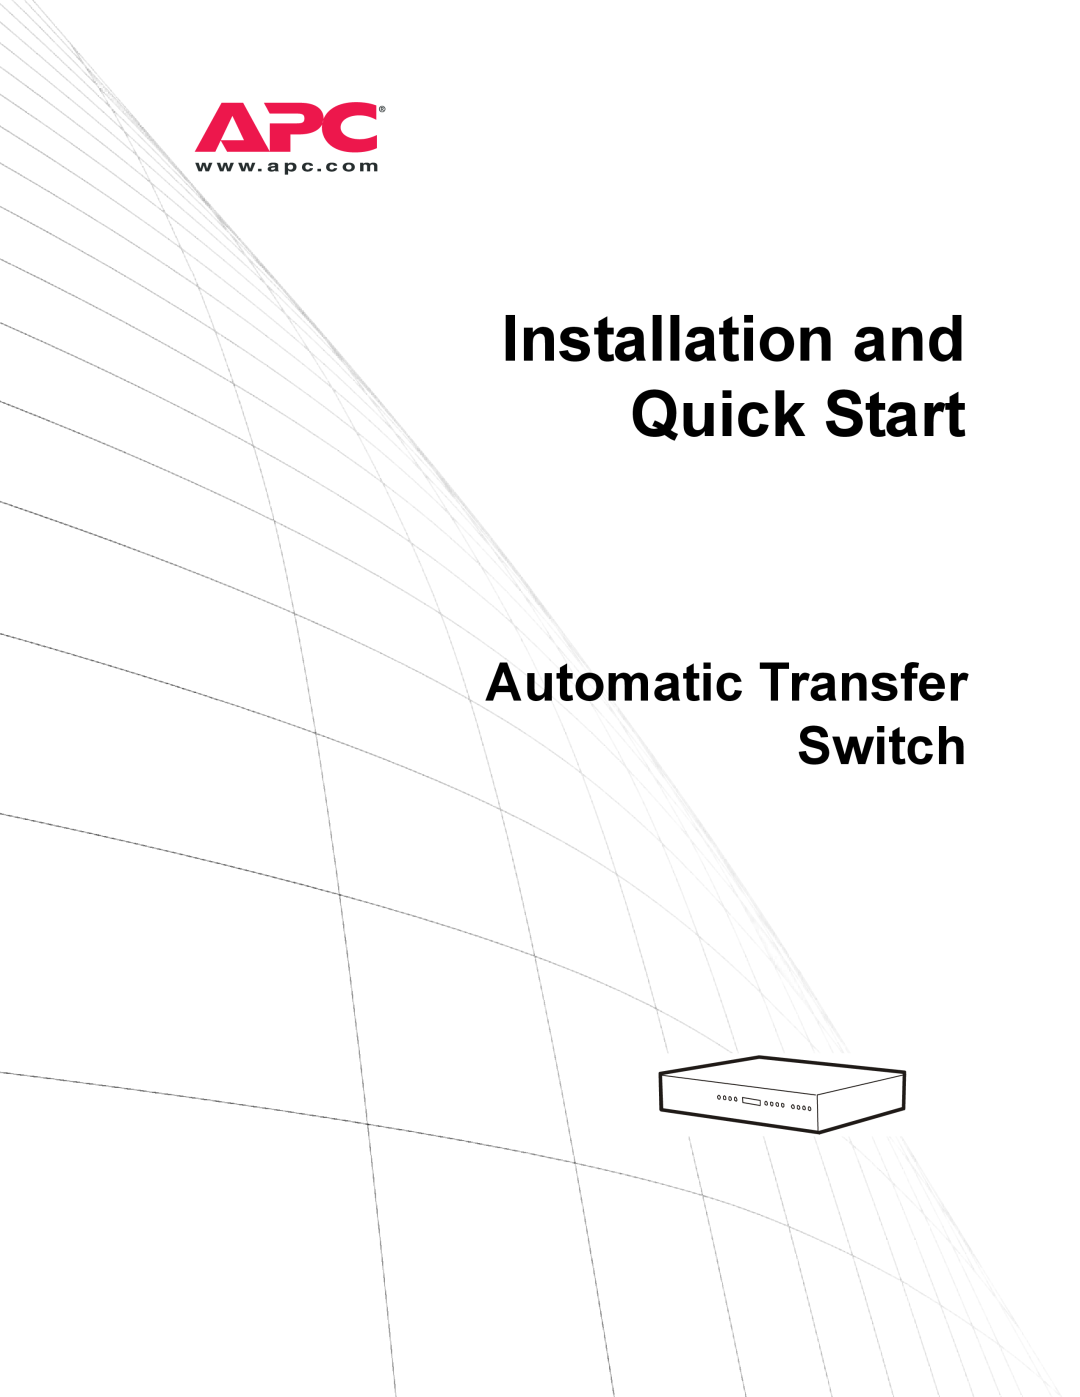 American Power Conversion quick start Installation and Quick Start, Automatic Transfer Switch 